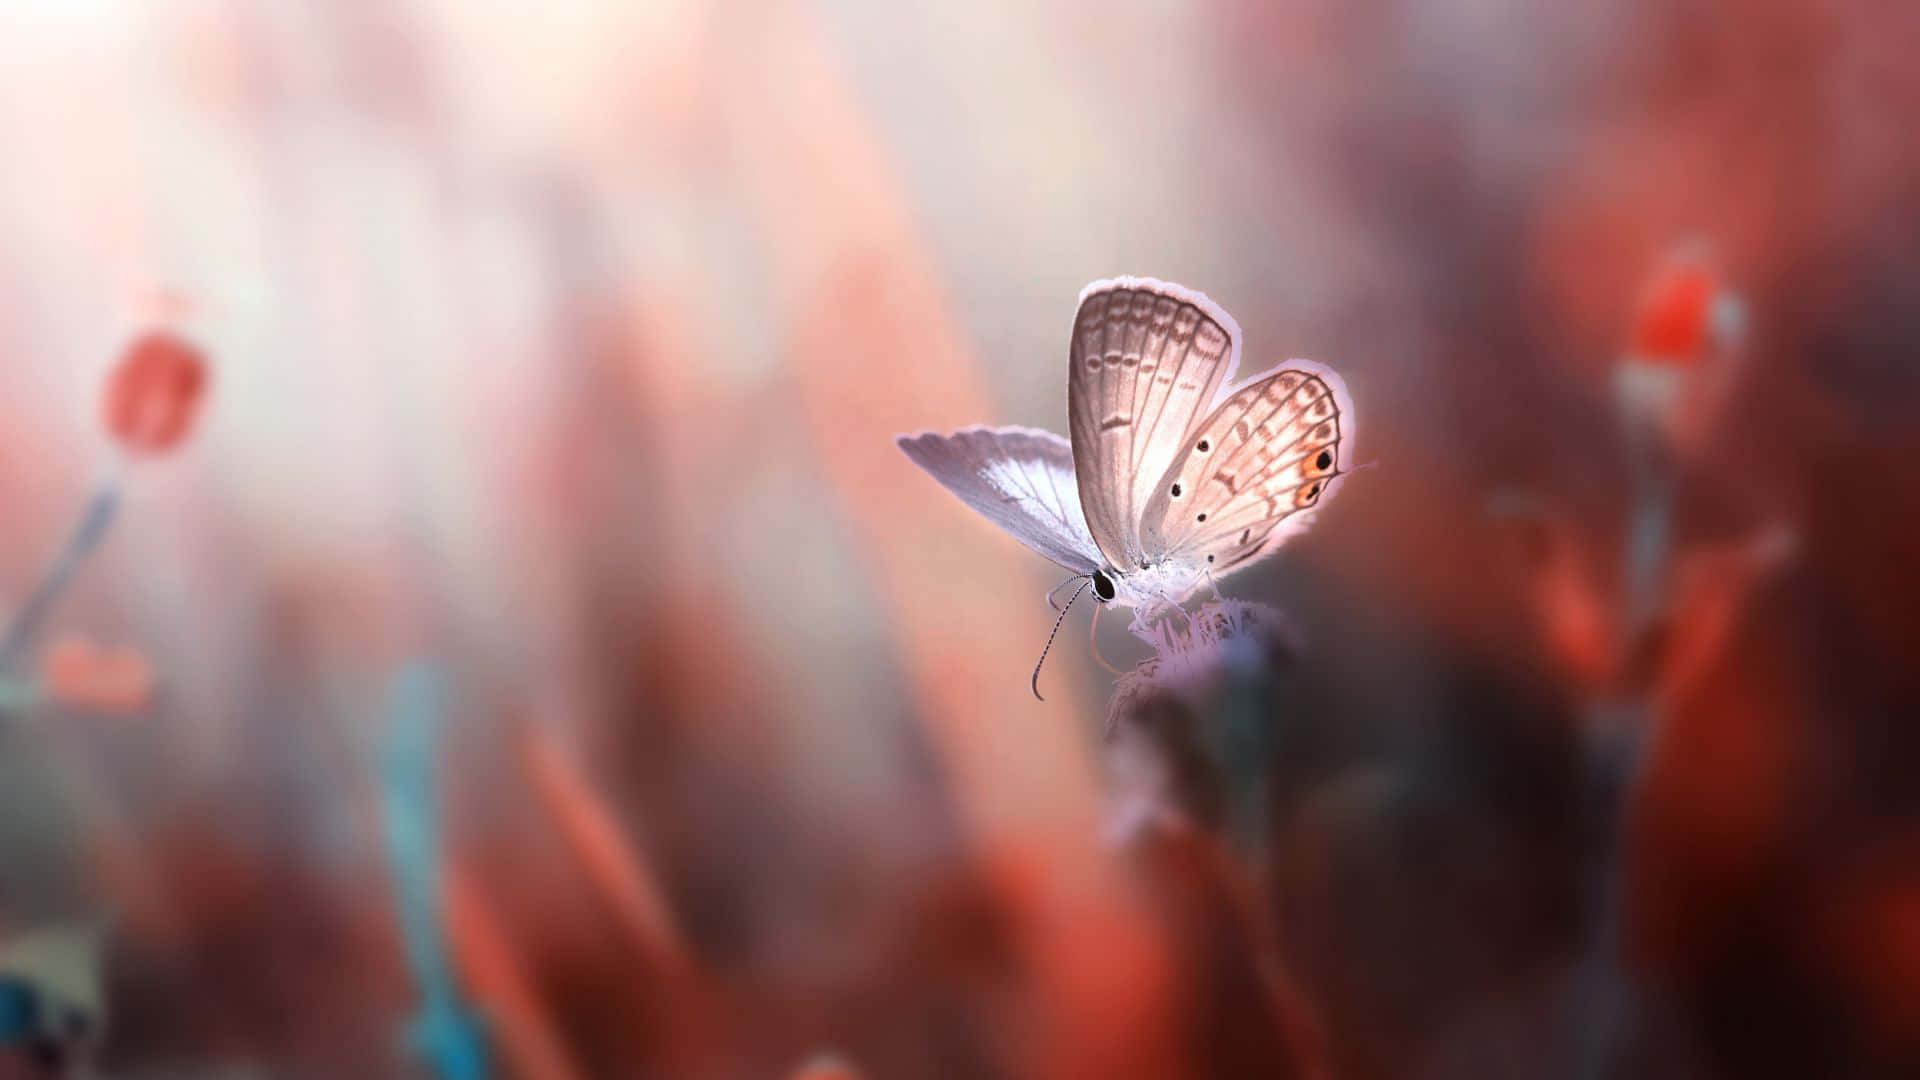 Magneficent Butterfly Insects Wallpaper